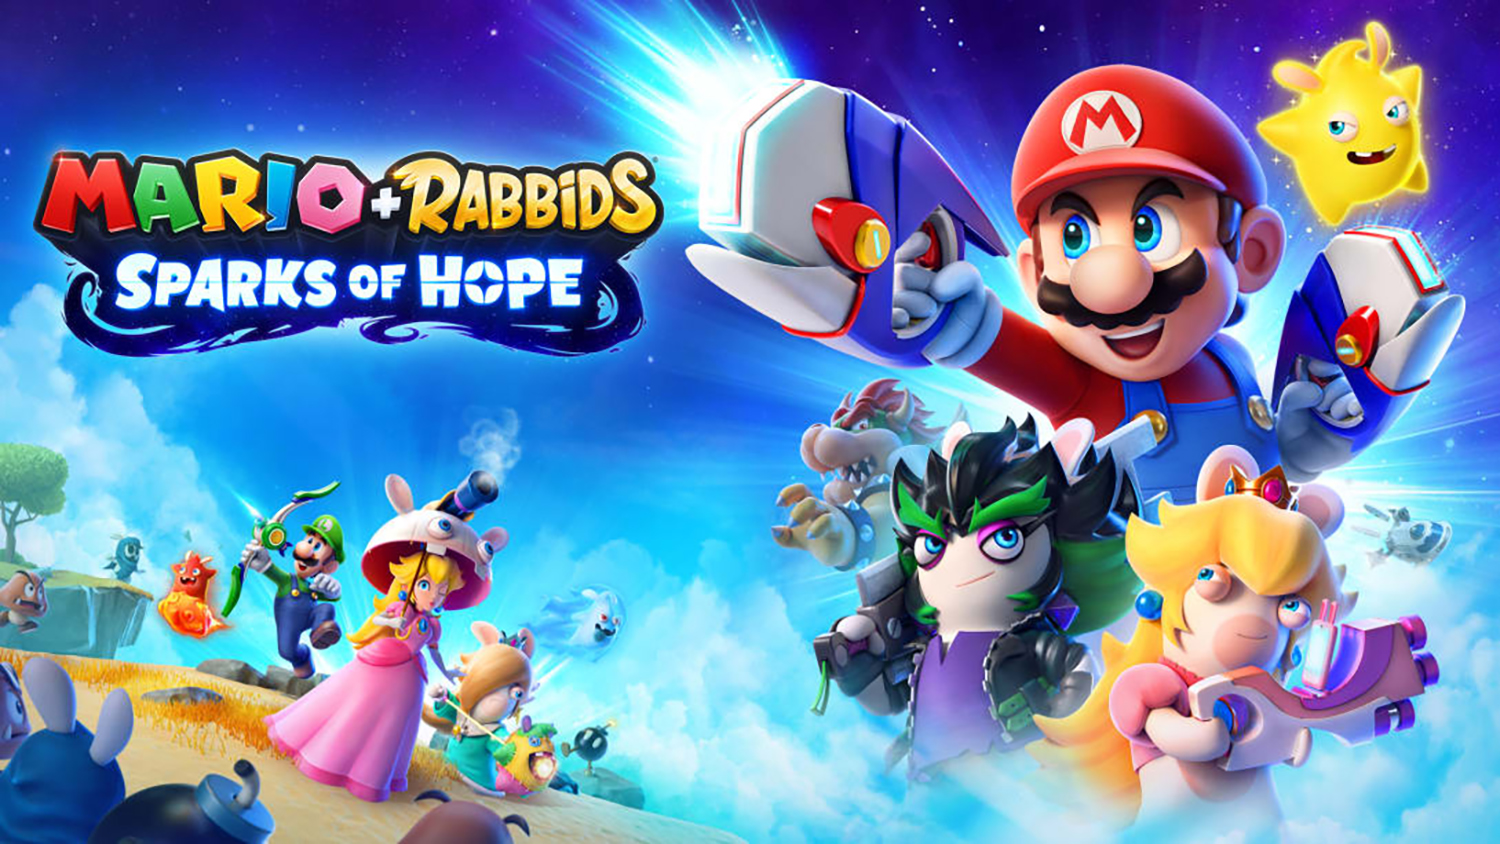 Key art for Mario + Rabbids Sparks of Hope, which was featured in the Nintendo Direct Mini June 2022.